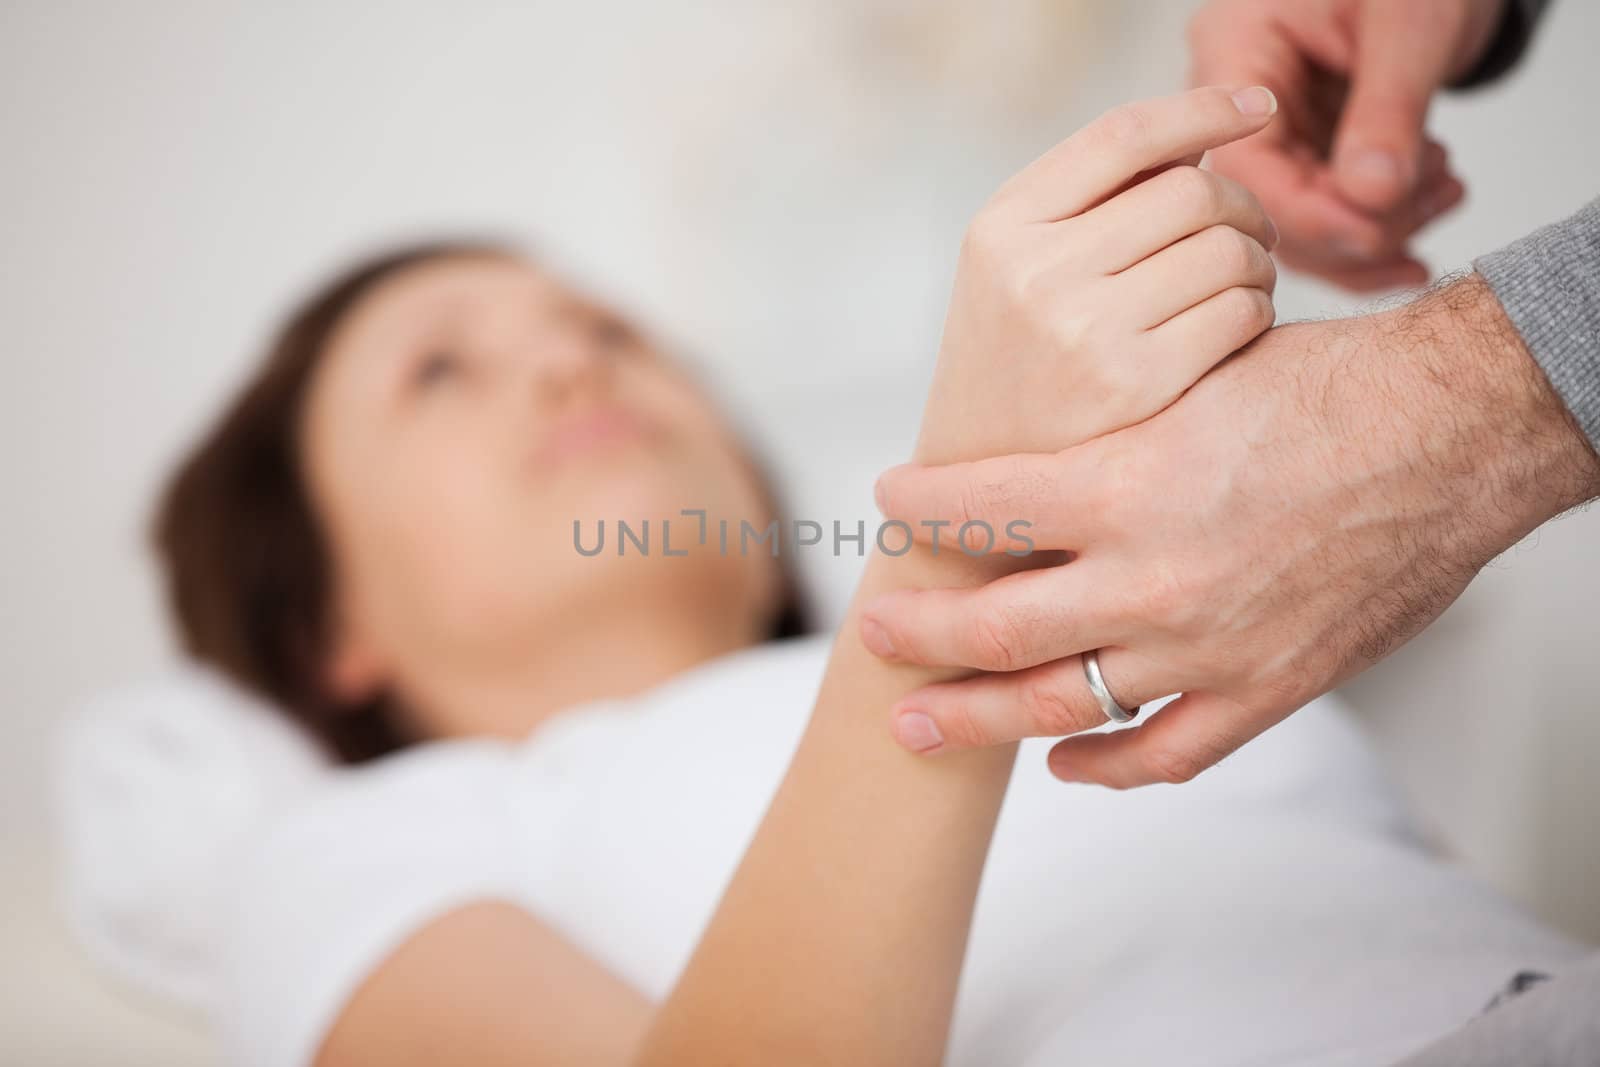 Hand of a woman being manipulated by Wavebreakmedia